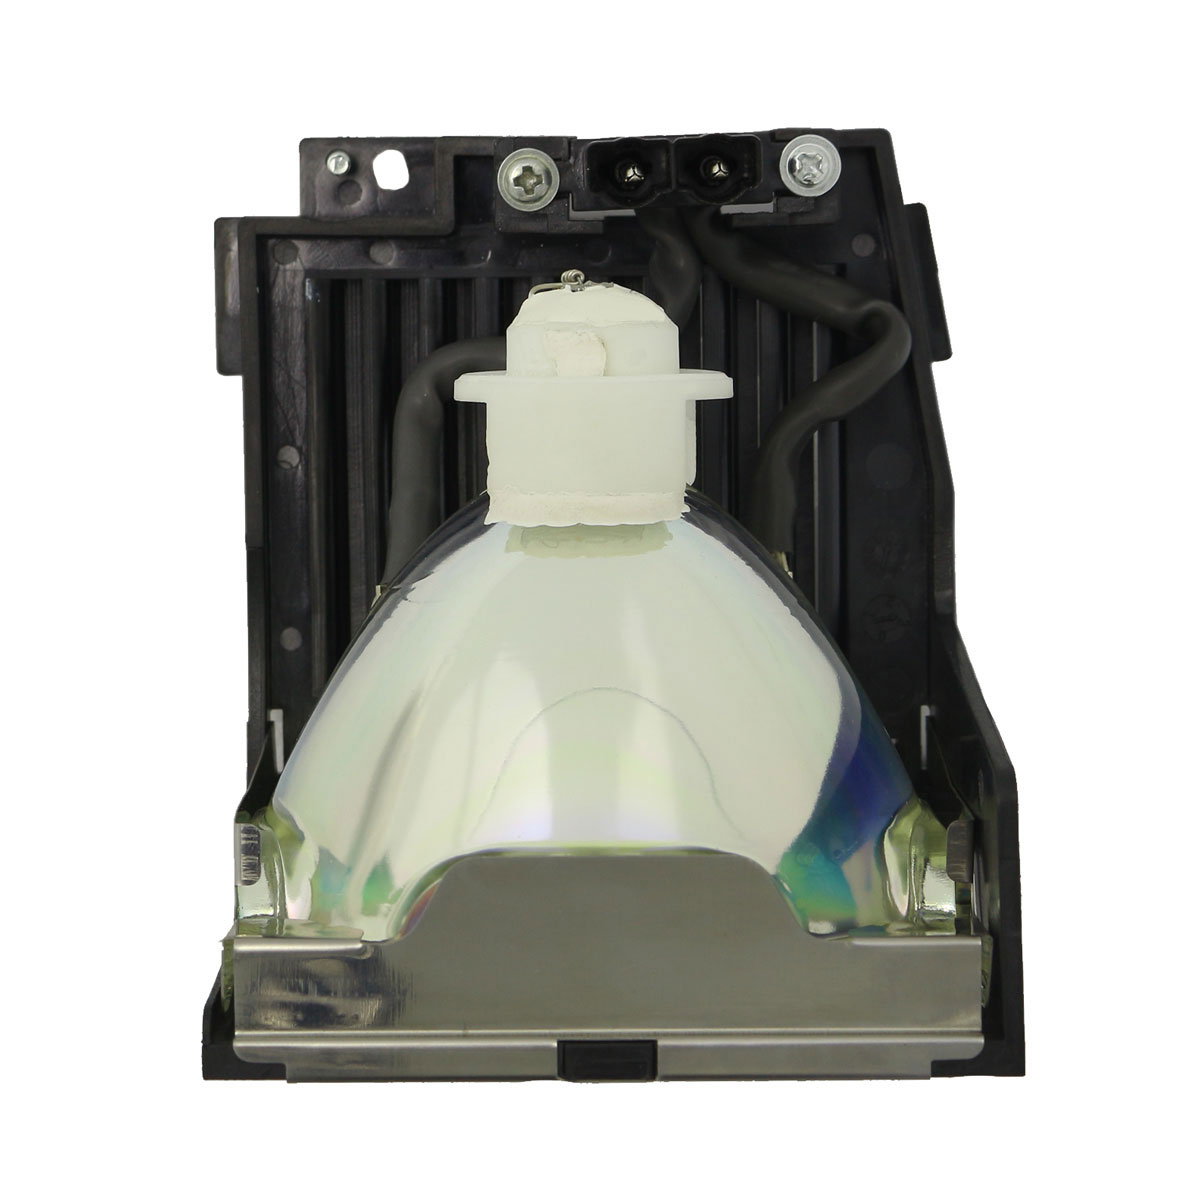 Lutema Economy Bulb for Eiki 610-301-7167 Projector (Lamp with Housing) - image 4 of 6